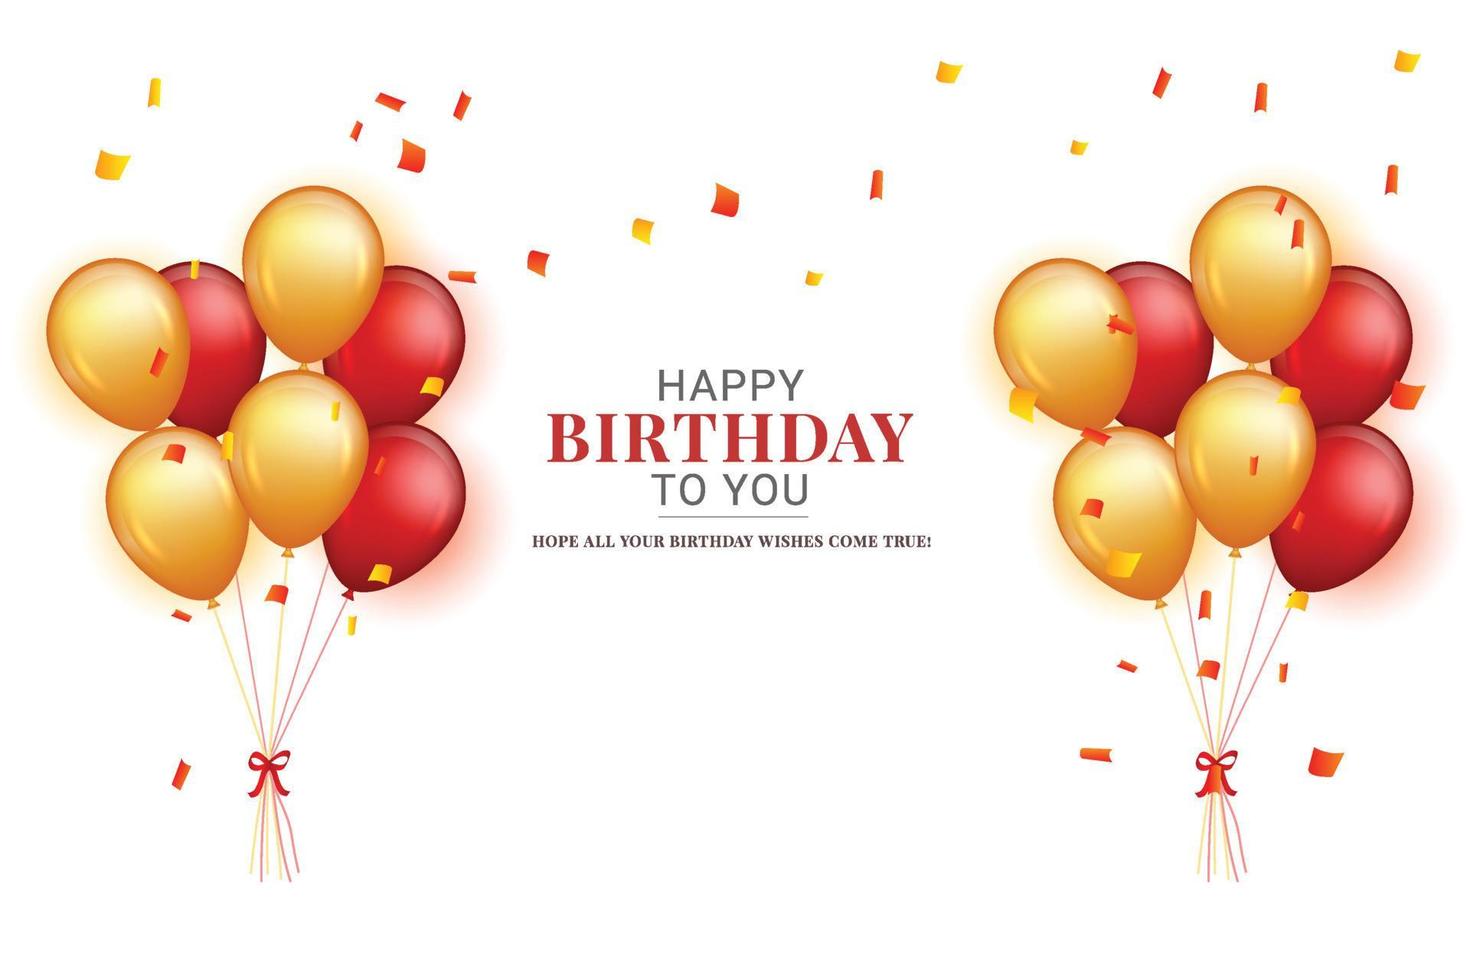 Happy Birthday wish red and yellow balloons vector